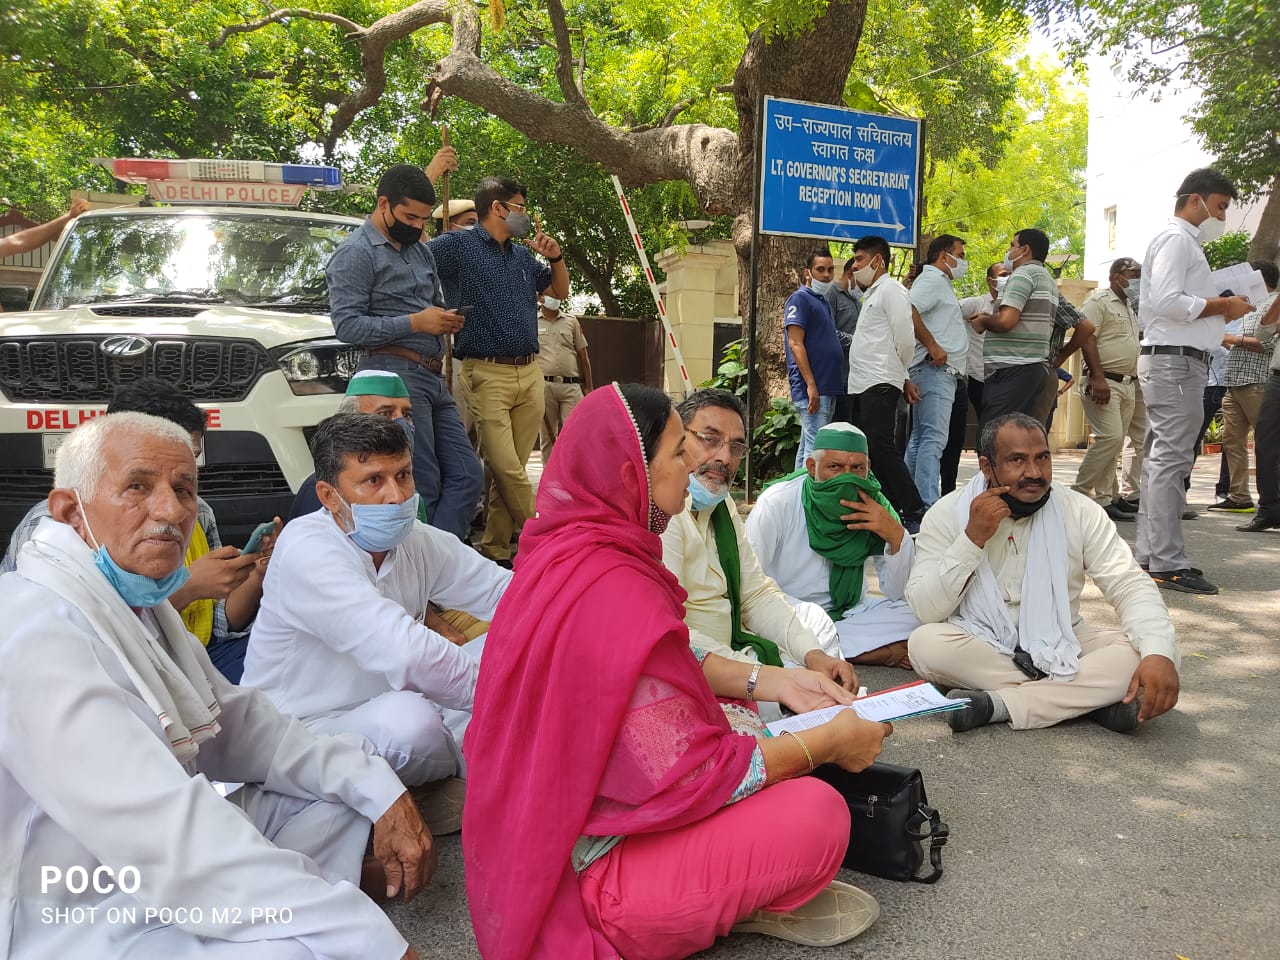 Delhi Police reached lg house with protesting farmer leaders